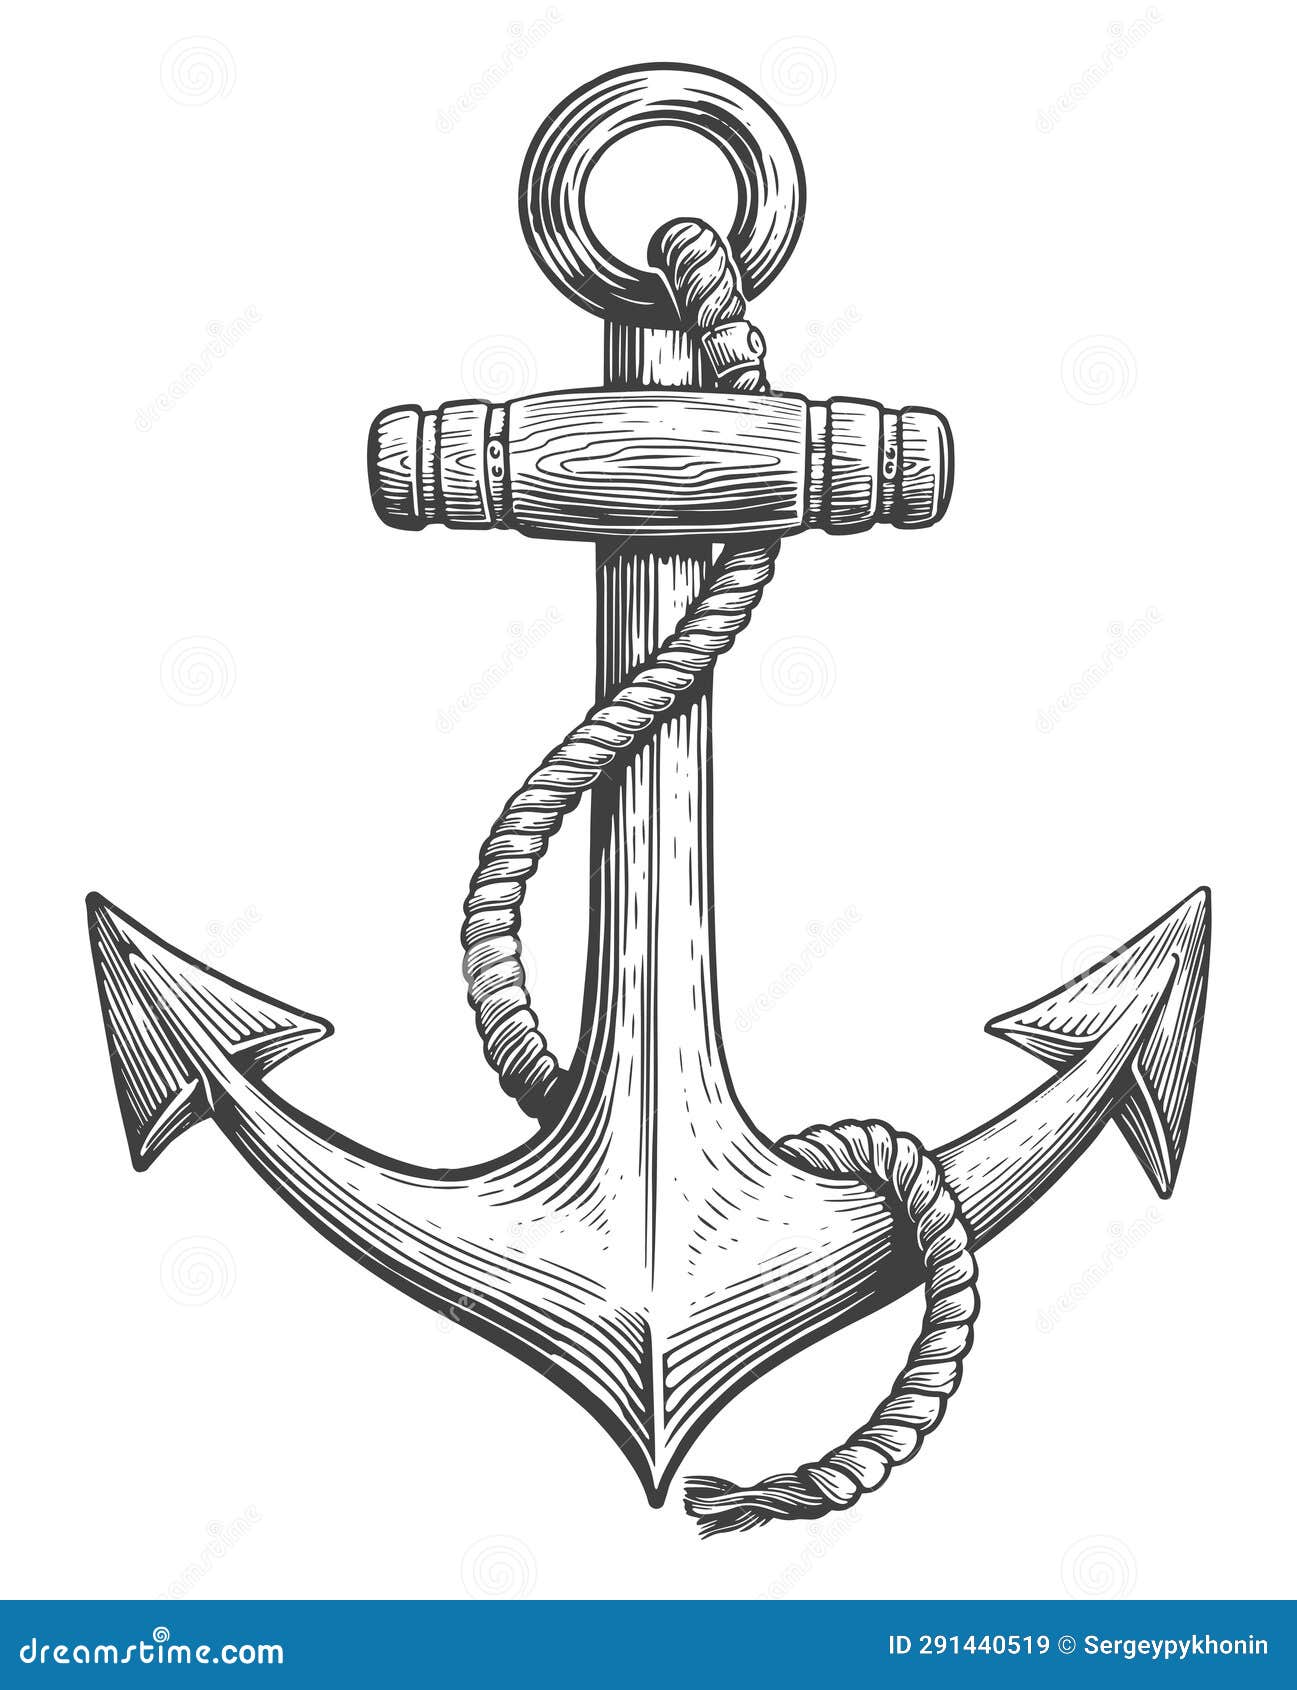 Vintage Sea Anchor with a Rope. Hand Drawn Vector Illustration in ...